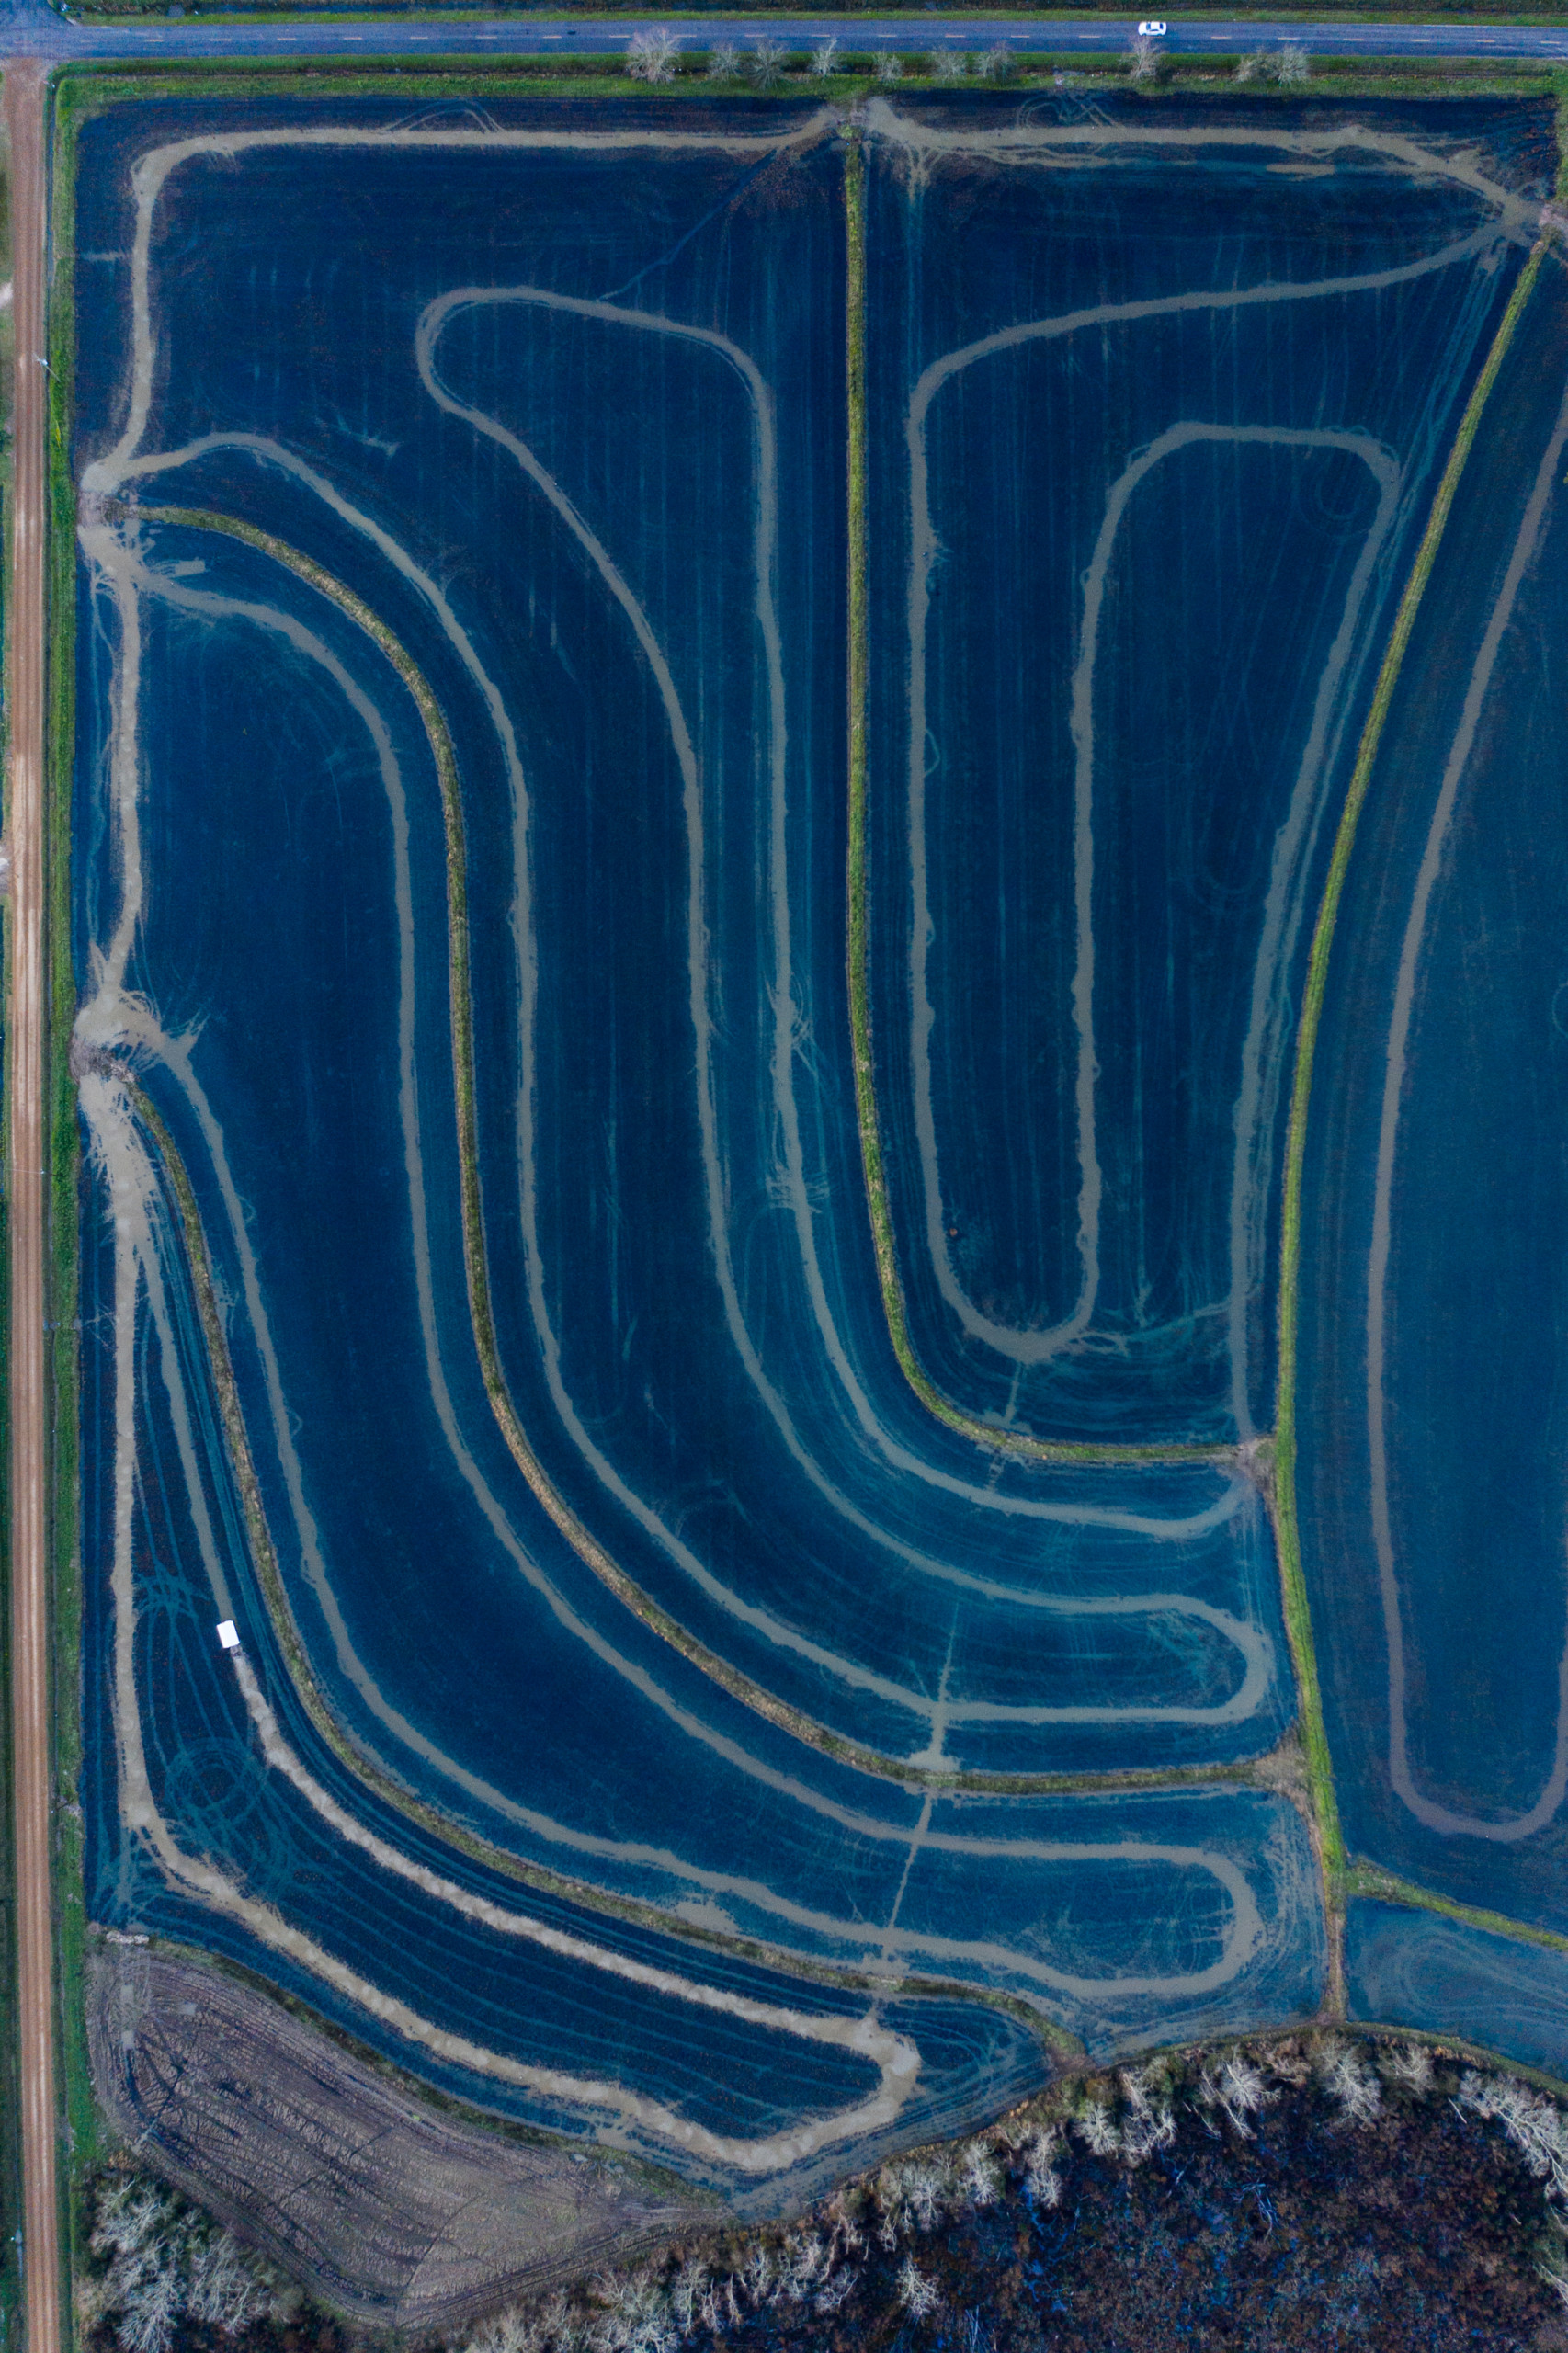 Lines traced through a flooded rice field for crawfish farming